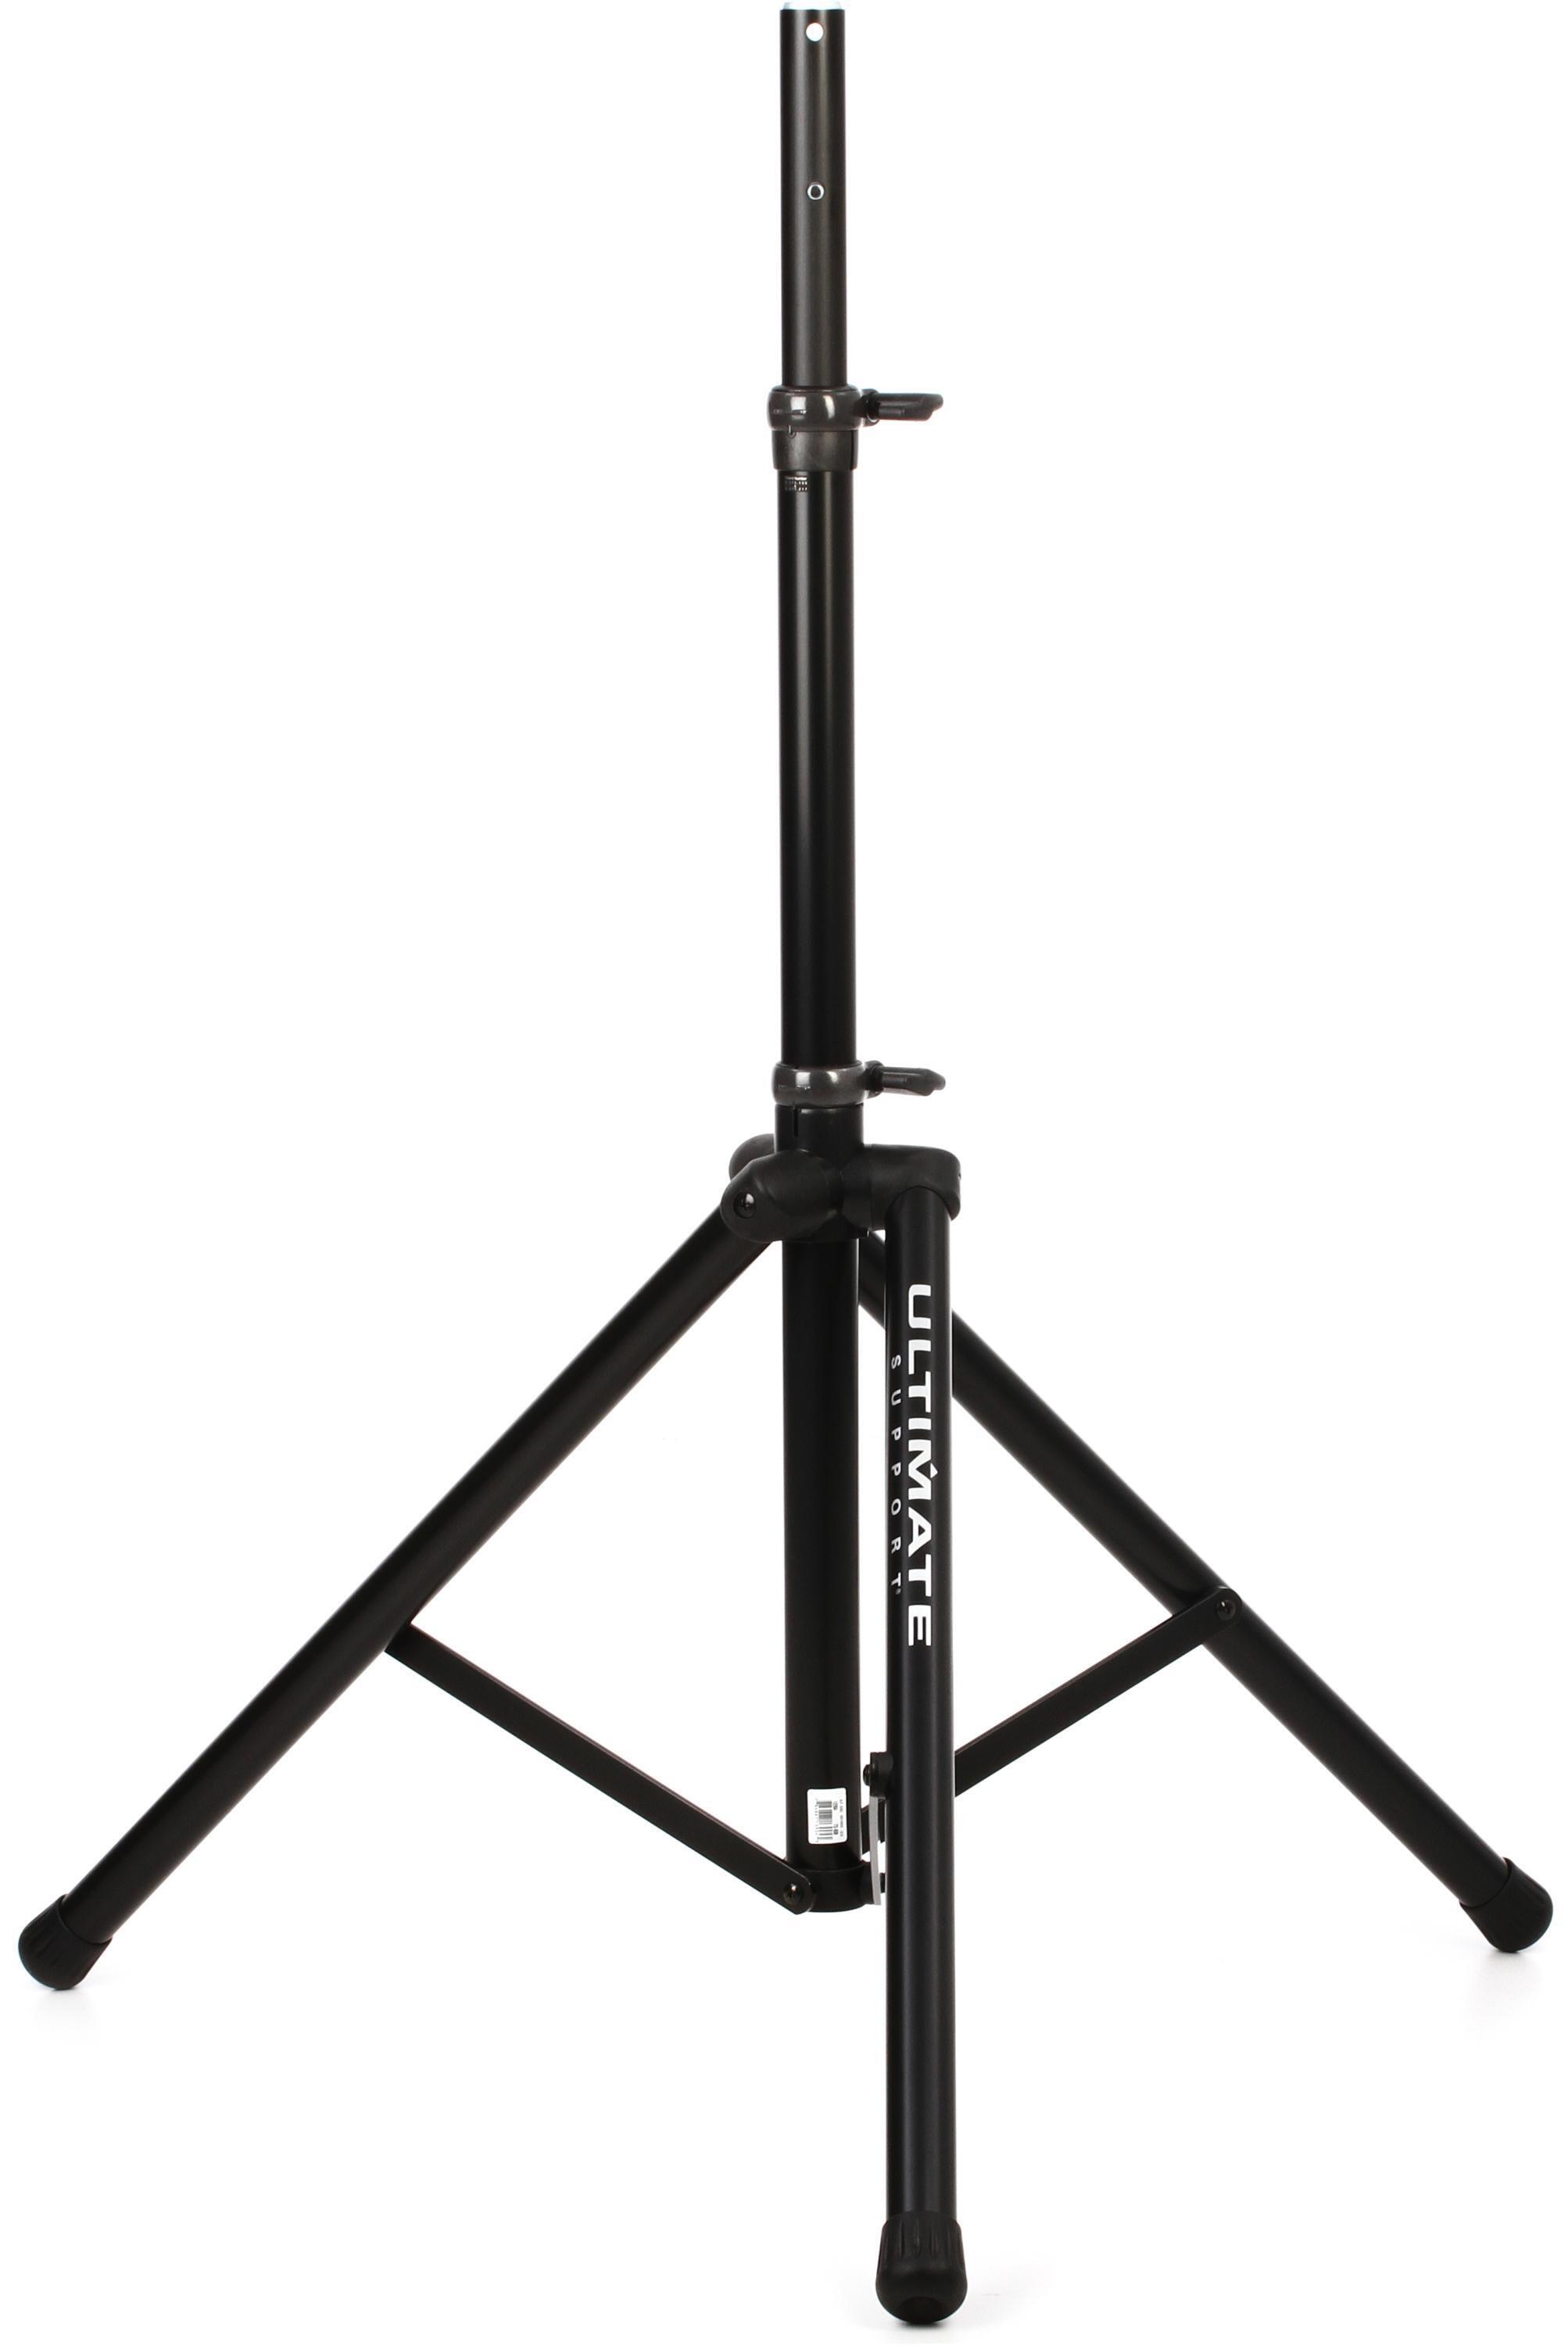 Ultimate Support TS-80B Speaker Stand - Black | Sweetwater